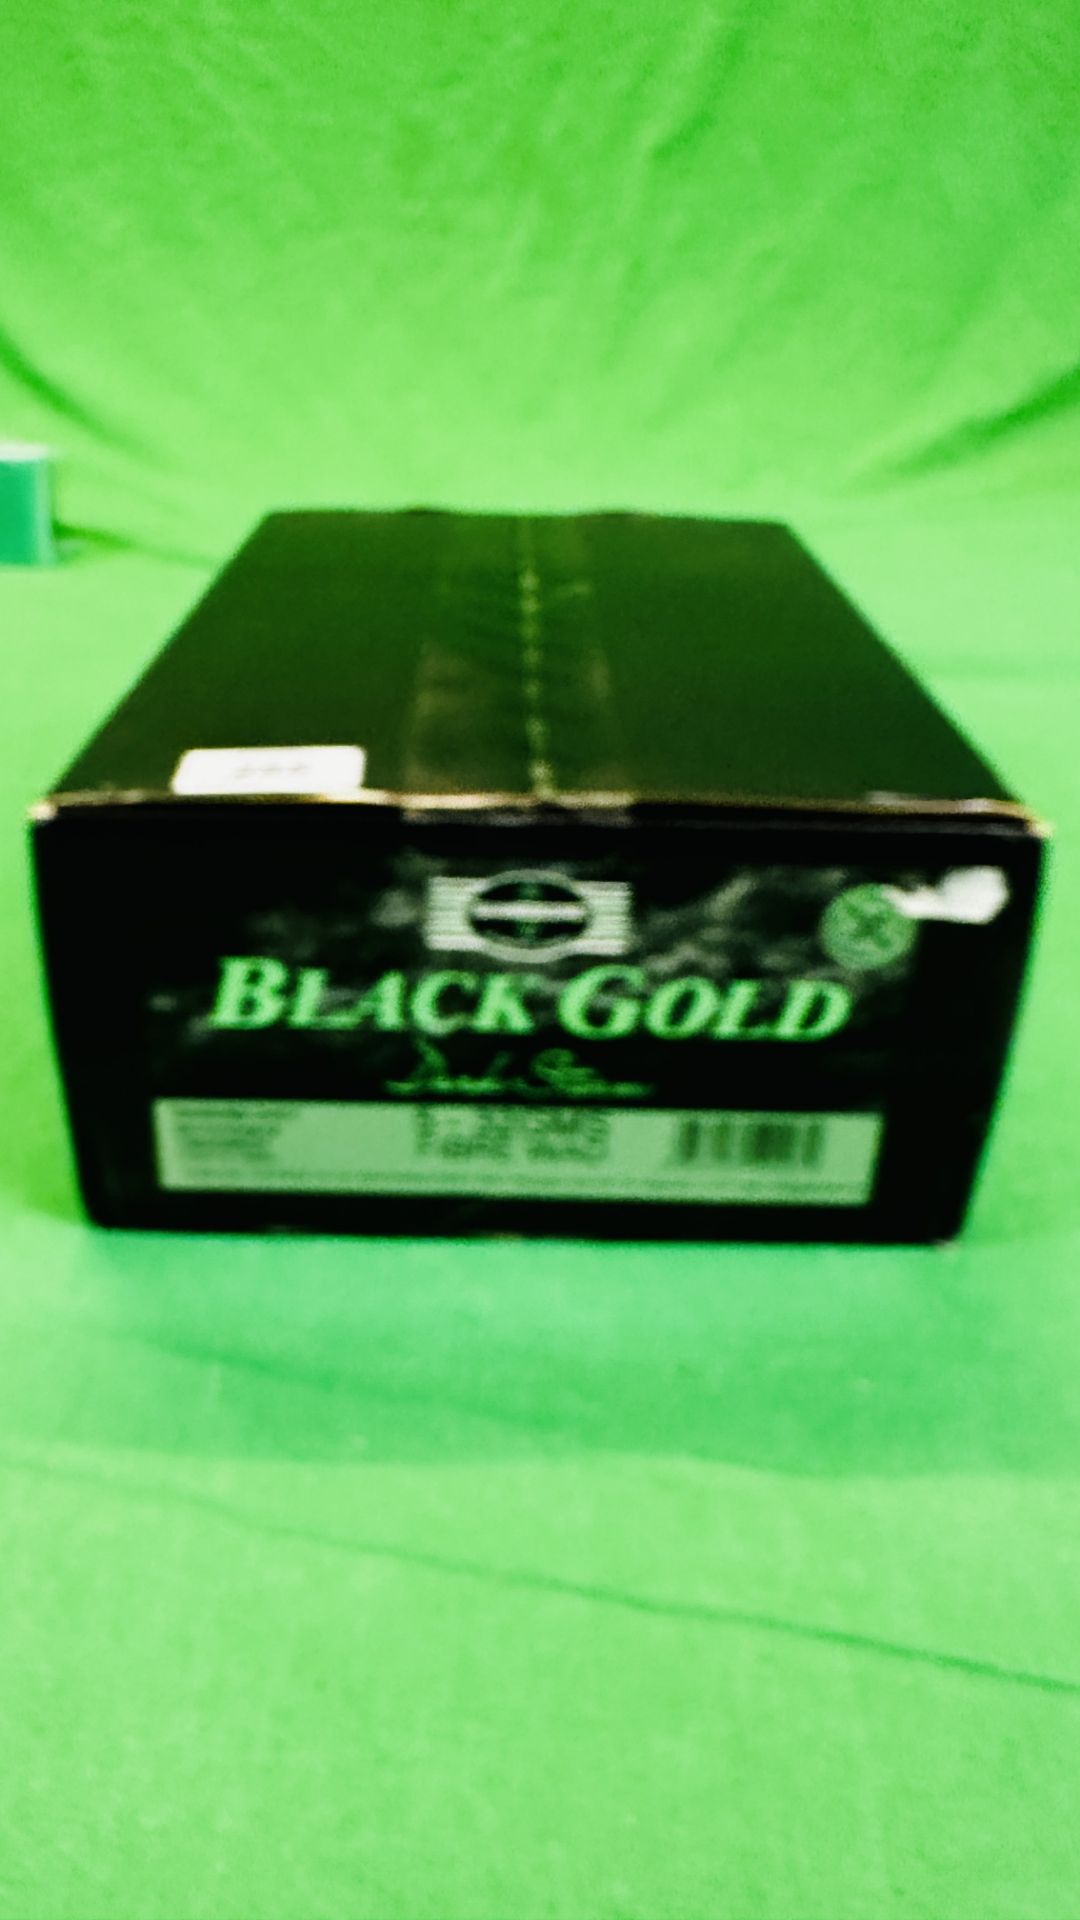 250 X GAMEBORE BLACK GOLD DARK STORM 5 SHOT 32 GRM CARTRIDGES - (TO BE COLLECTED IN PERSON BY